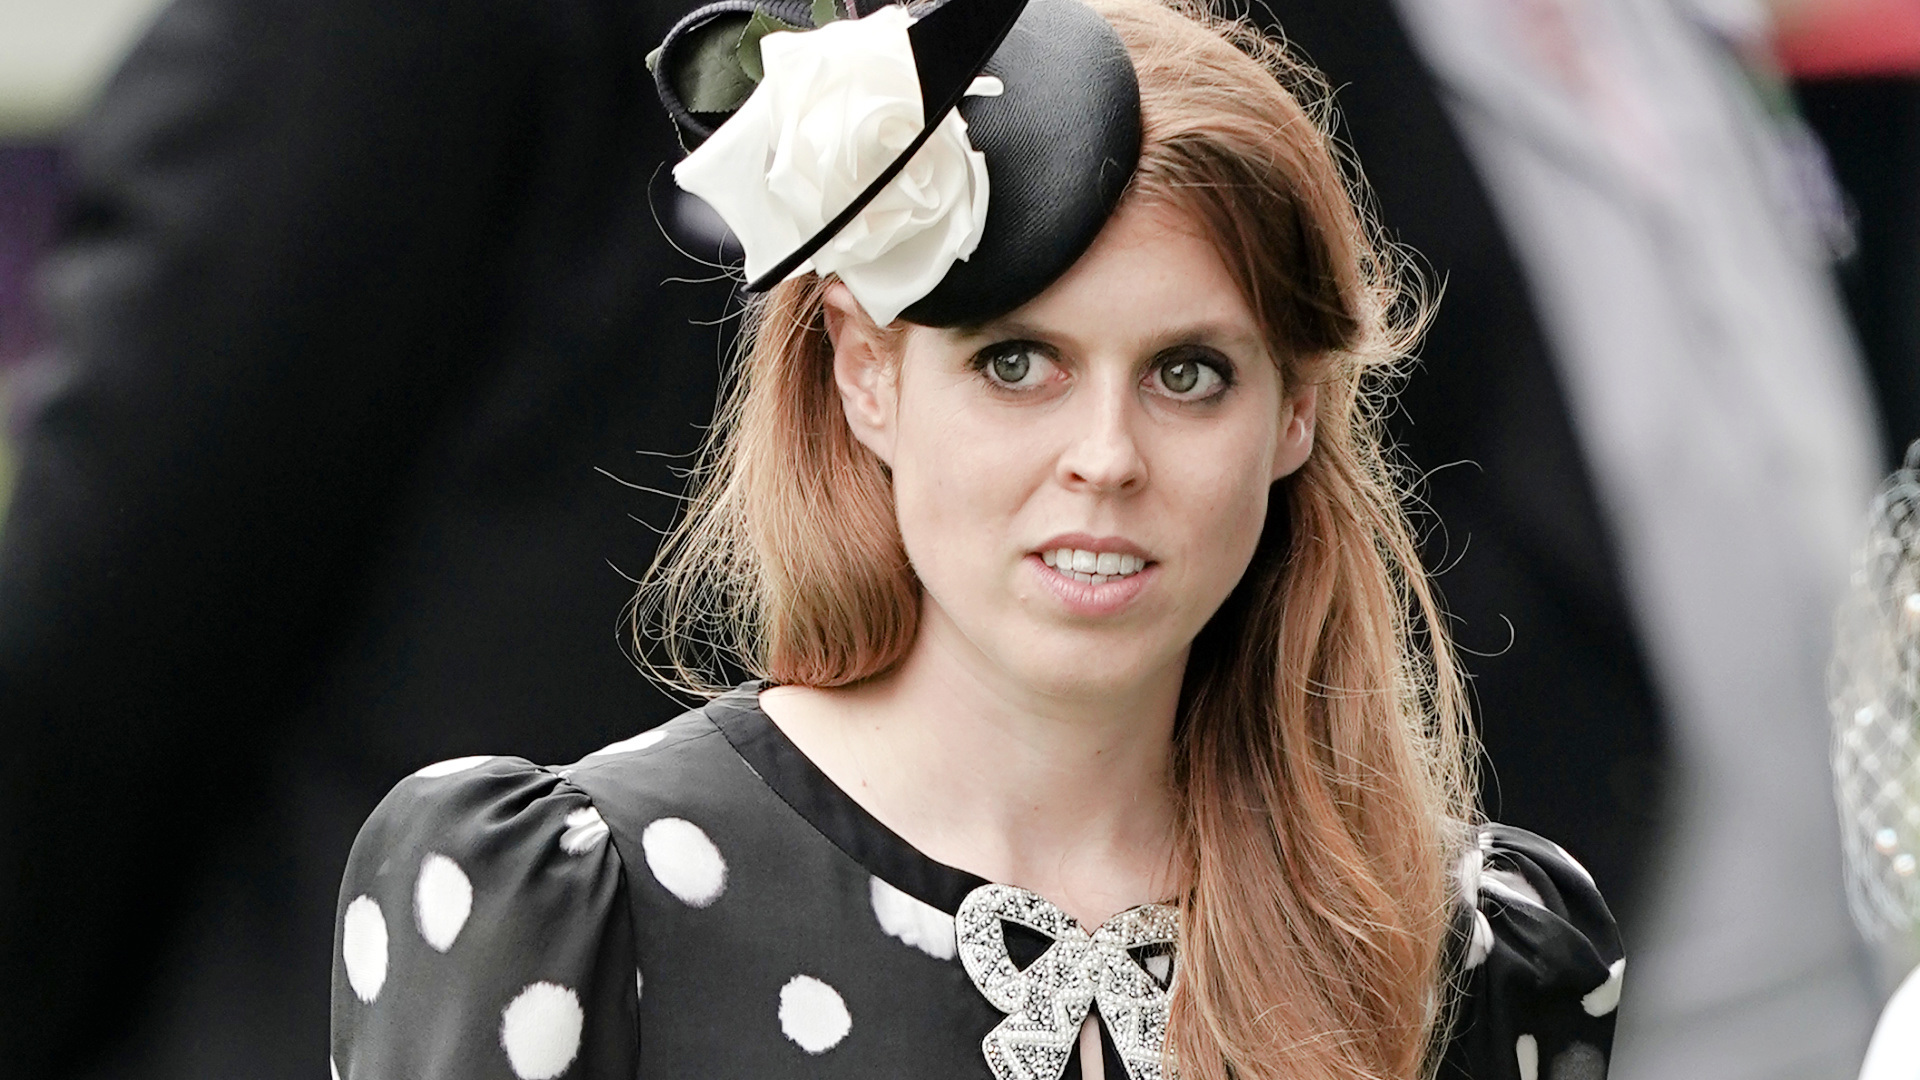 Beatrice at Royal Ascot, her Pretzel hat, and other looks of the ...